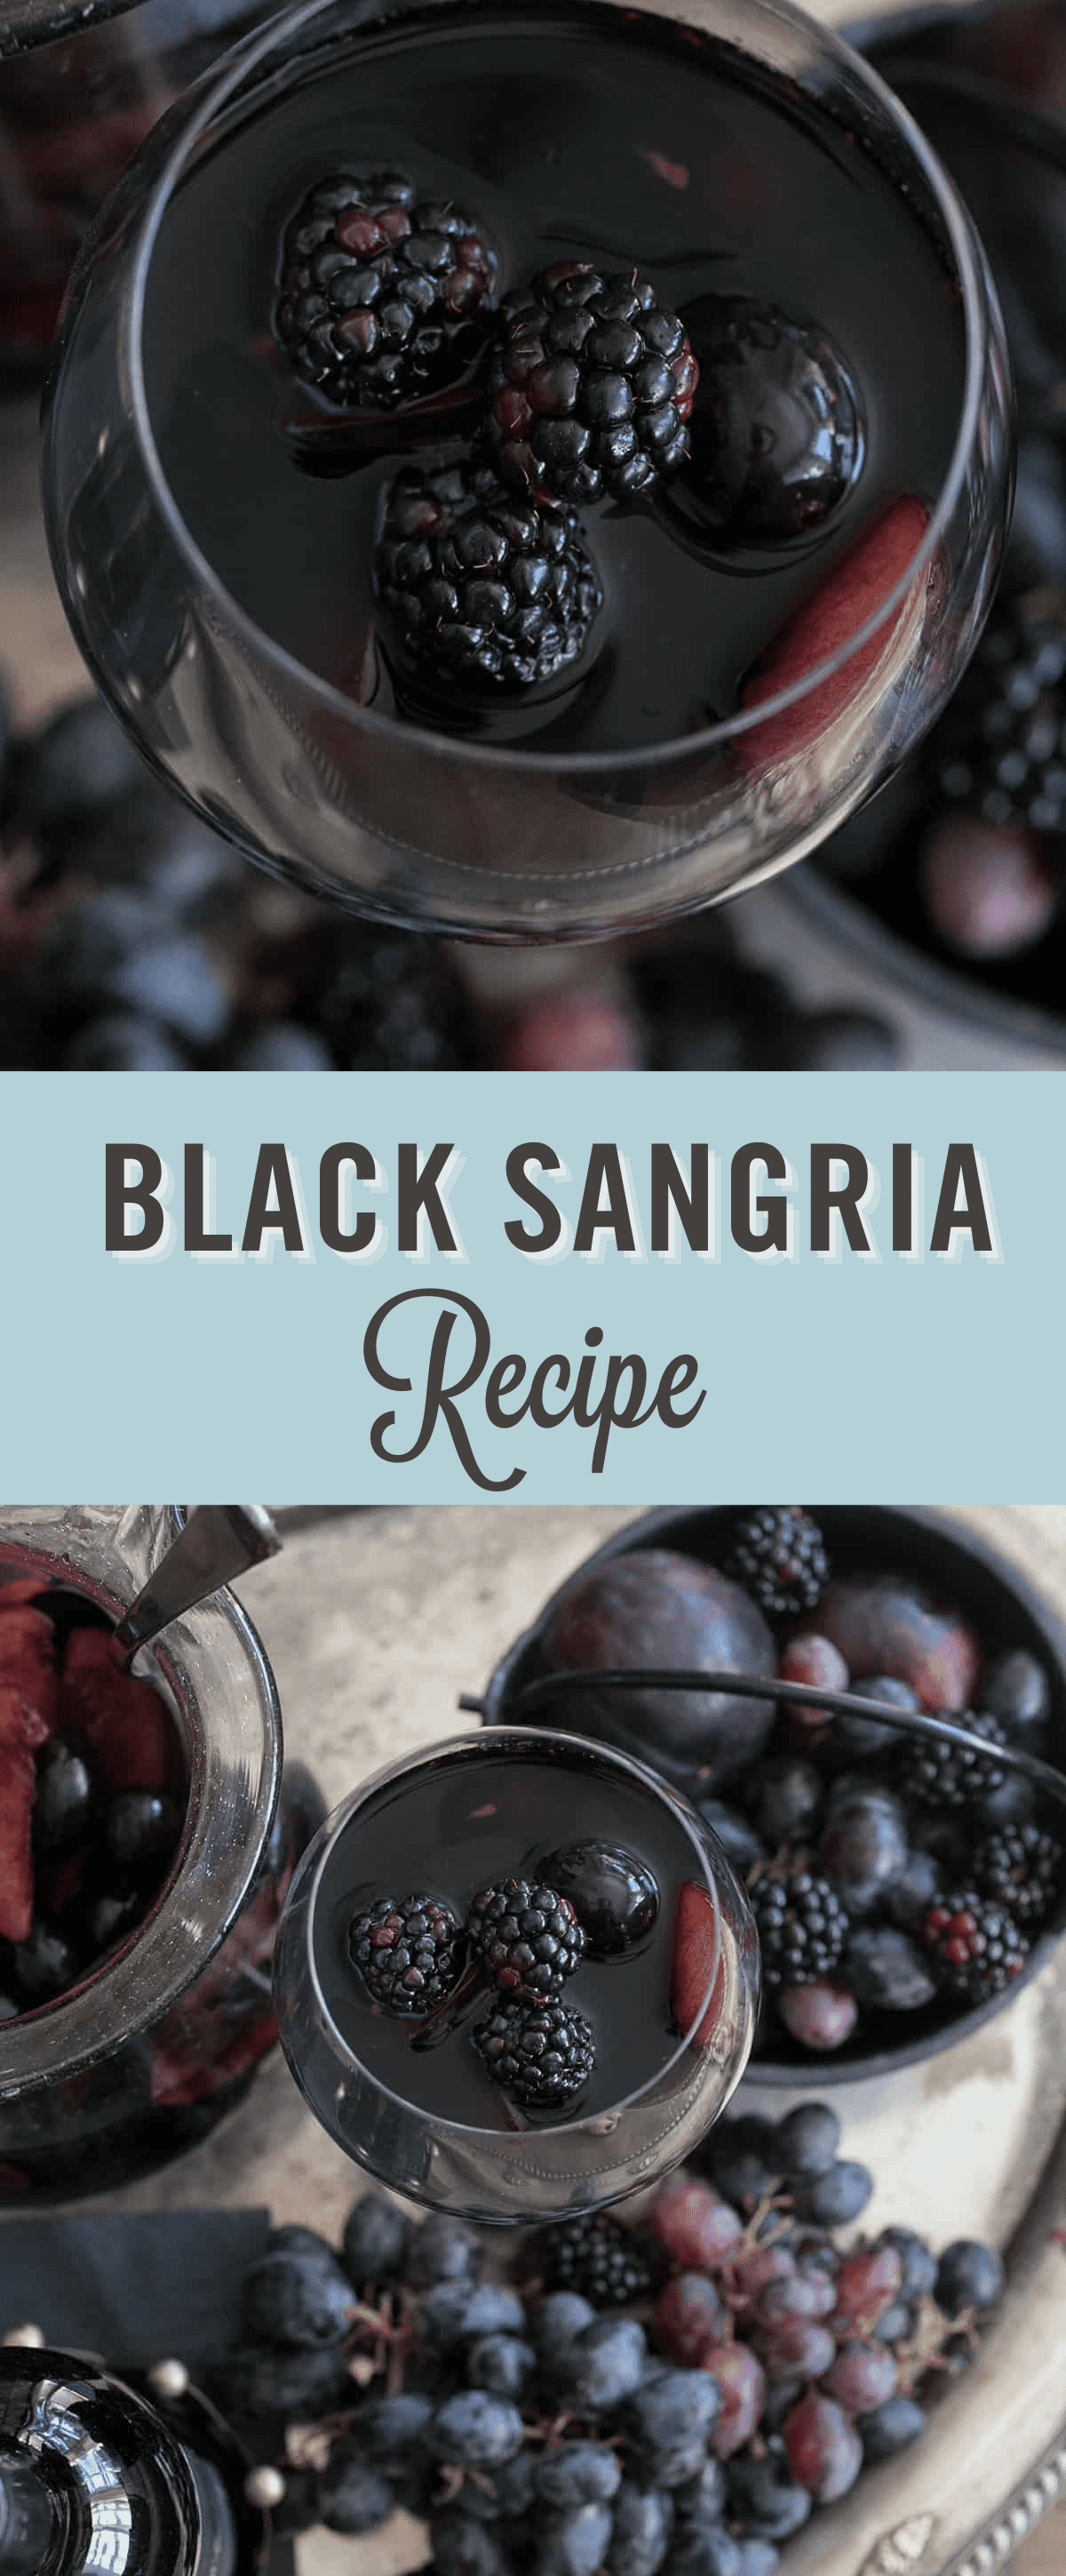 Black sangria images with text.